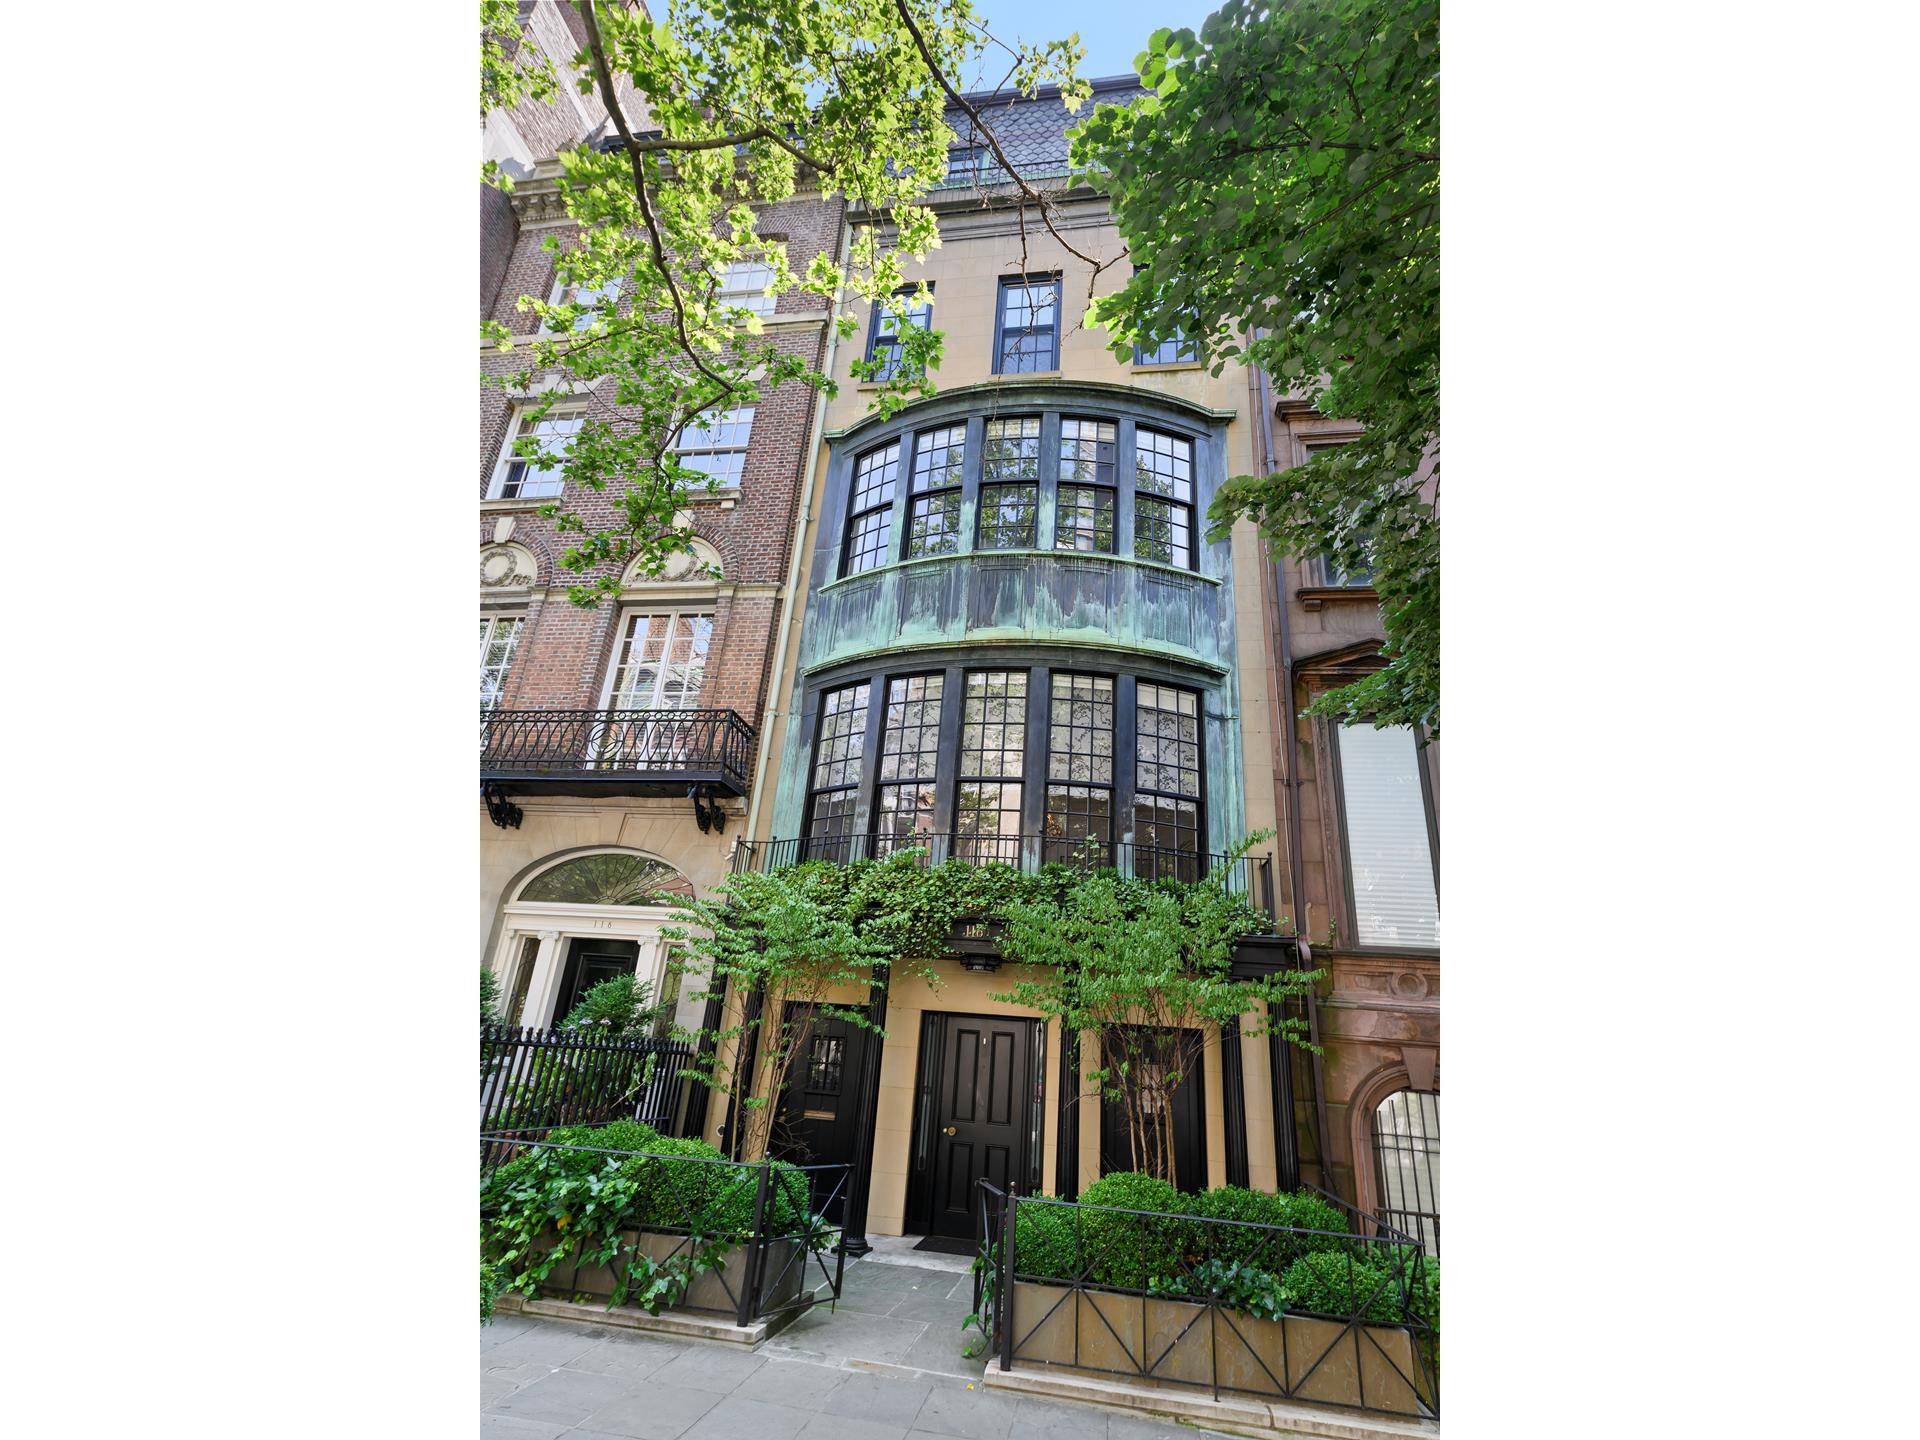 TRIPLE MINT TOWNHOUSE ON PRIME BLOCK Located on one of the best town house blocks on the upper east side, this historic single family home has been newly renovated and ...